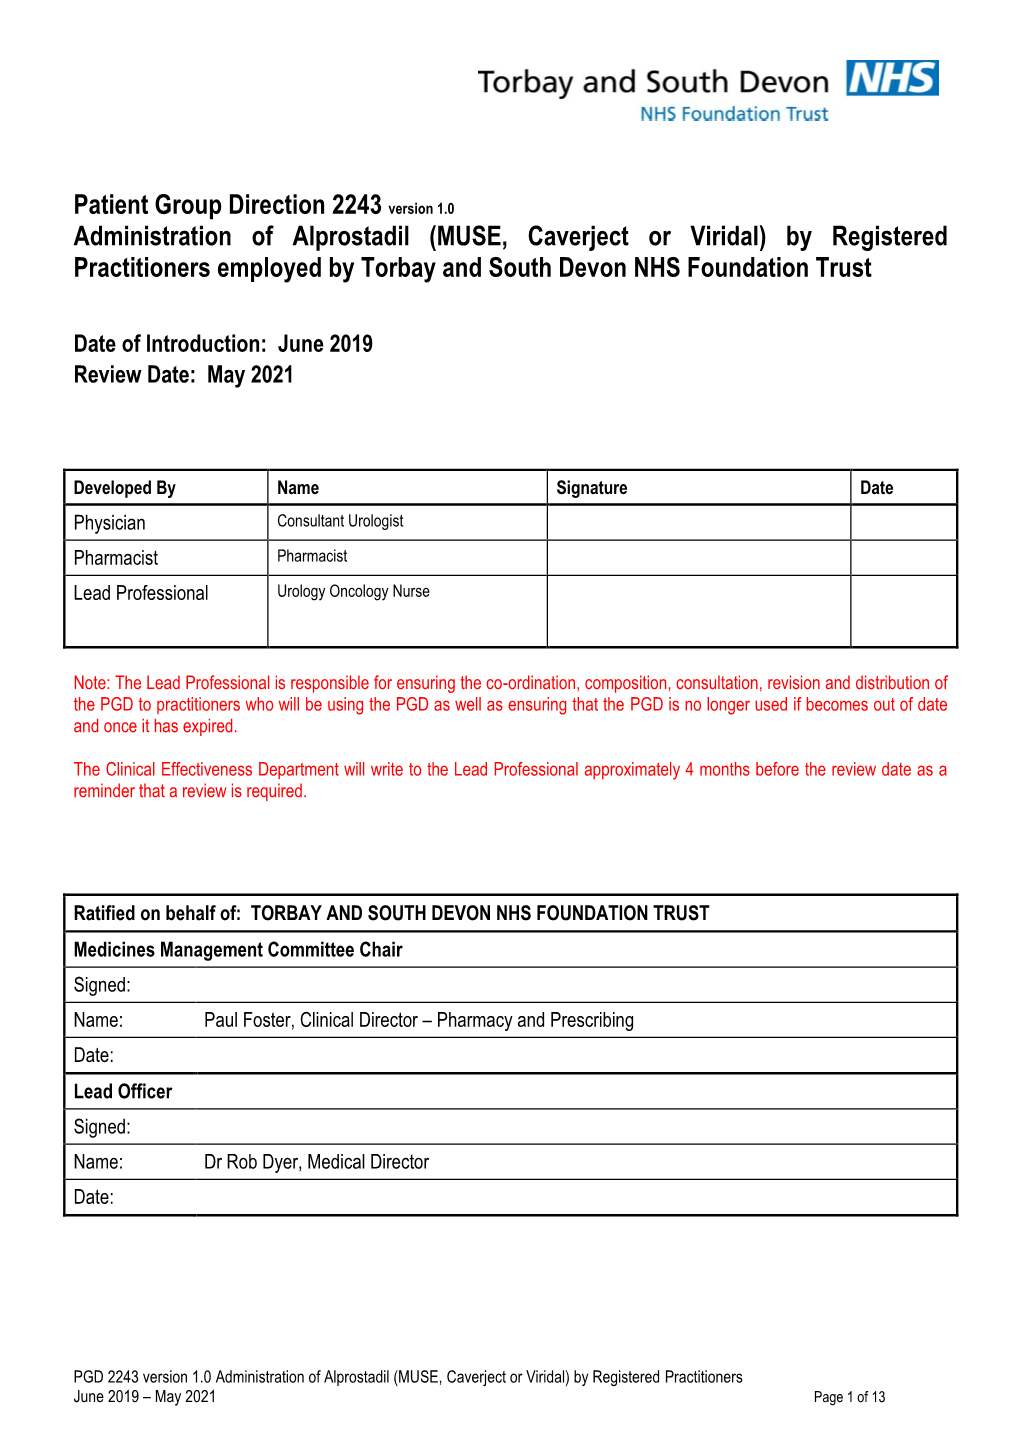 Alprostadil (MUSE, Caverject Or Viridal) by Registered Practitioners Employed by Torbay and South Devon NHS Foundation Trust